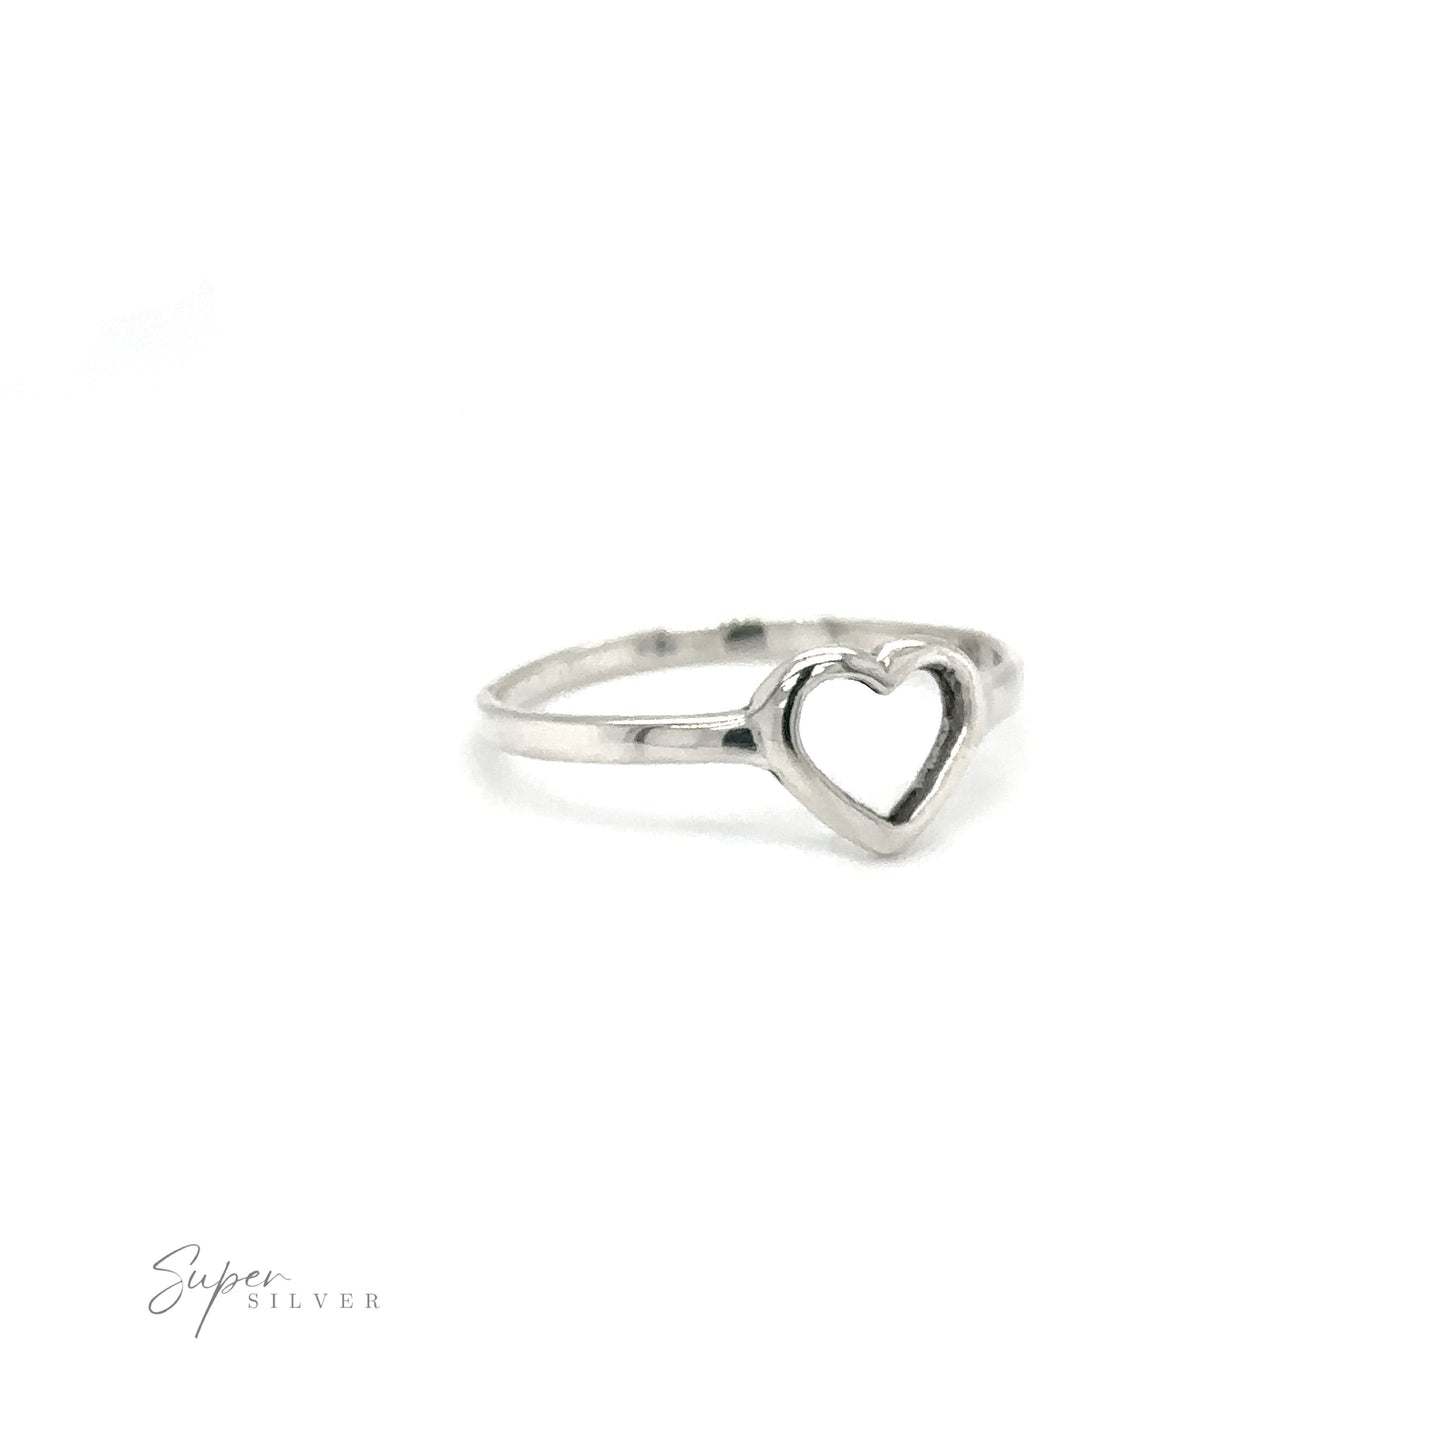 A Delicate Heart Outline Ring on a white background, symbolizing love.